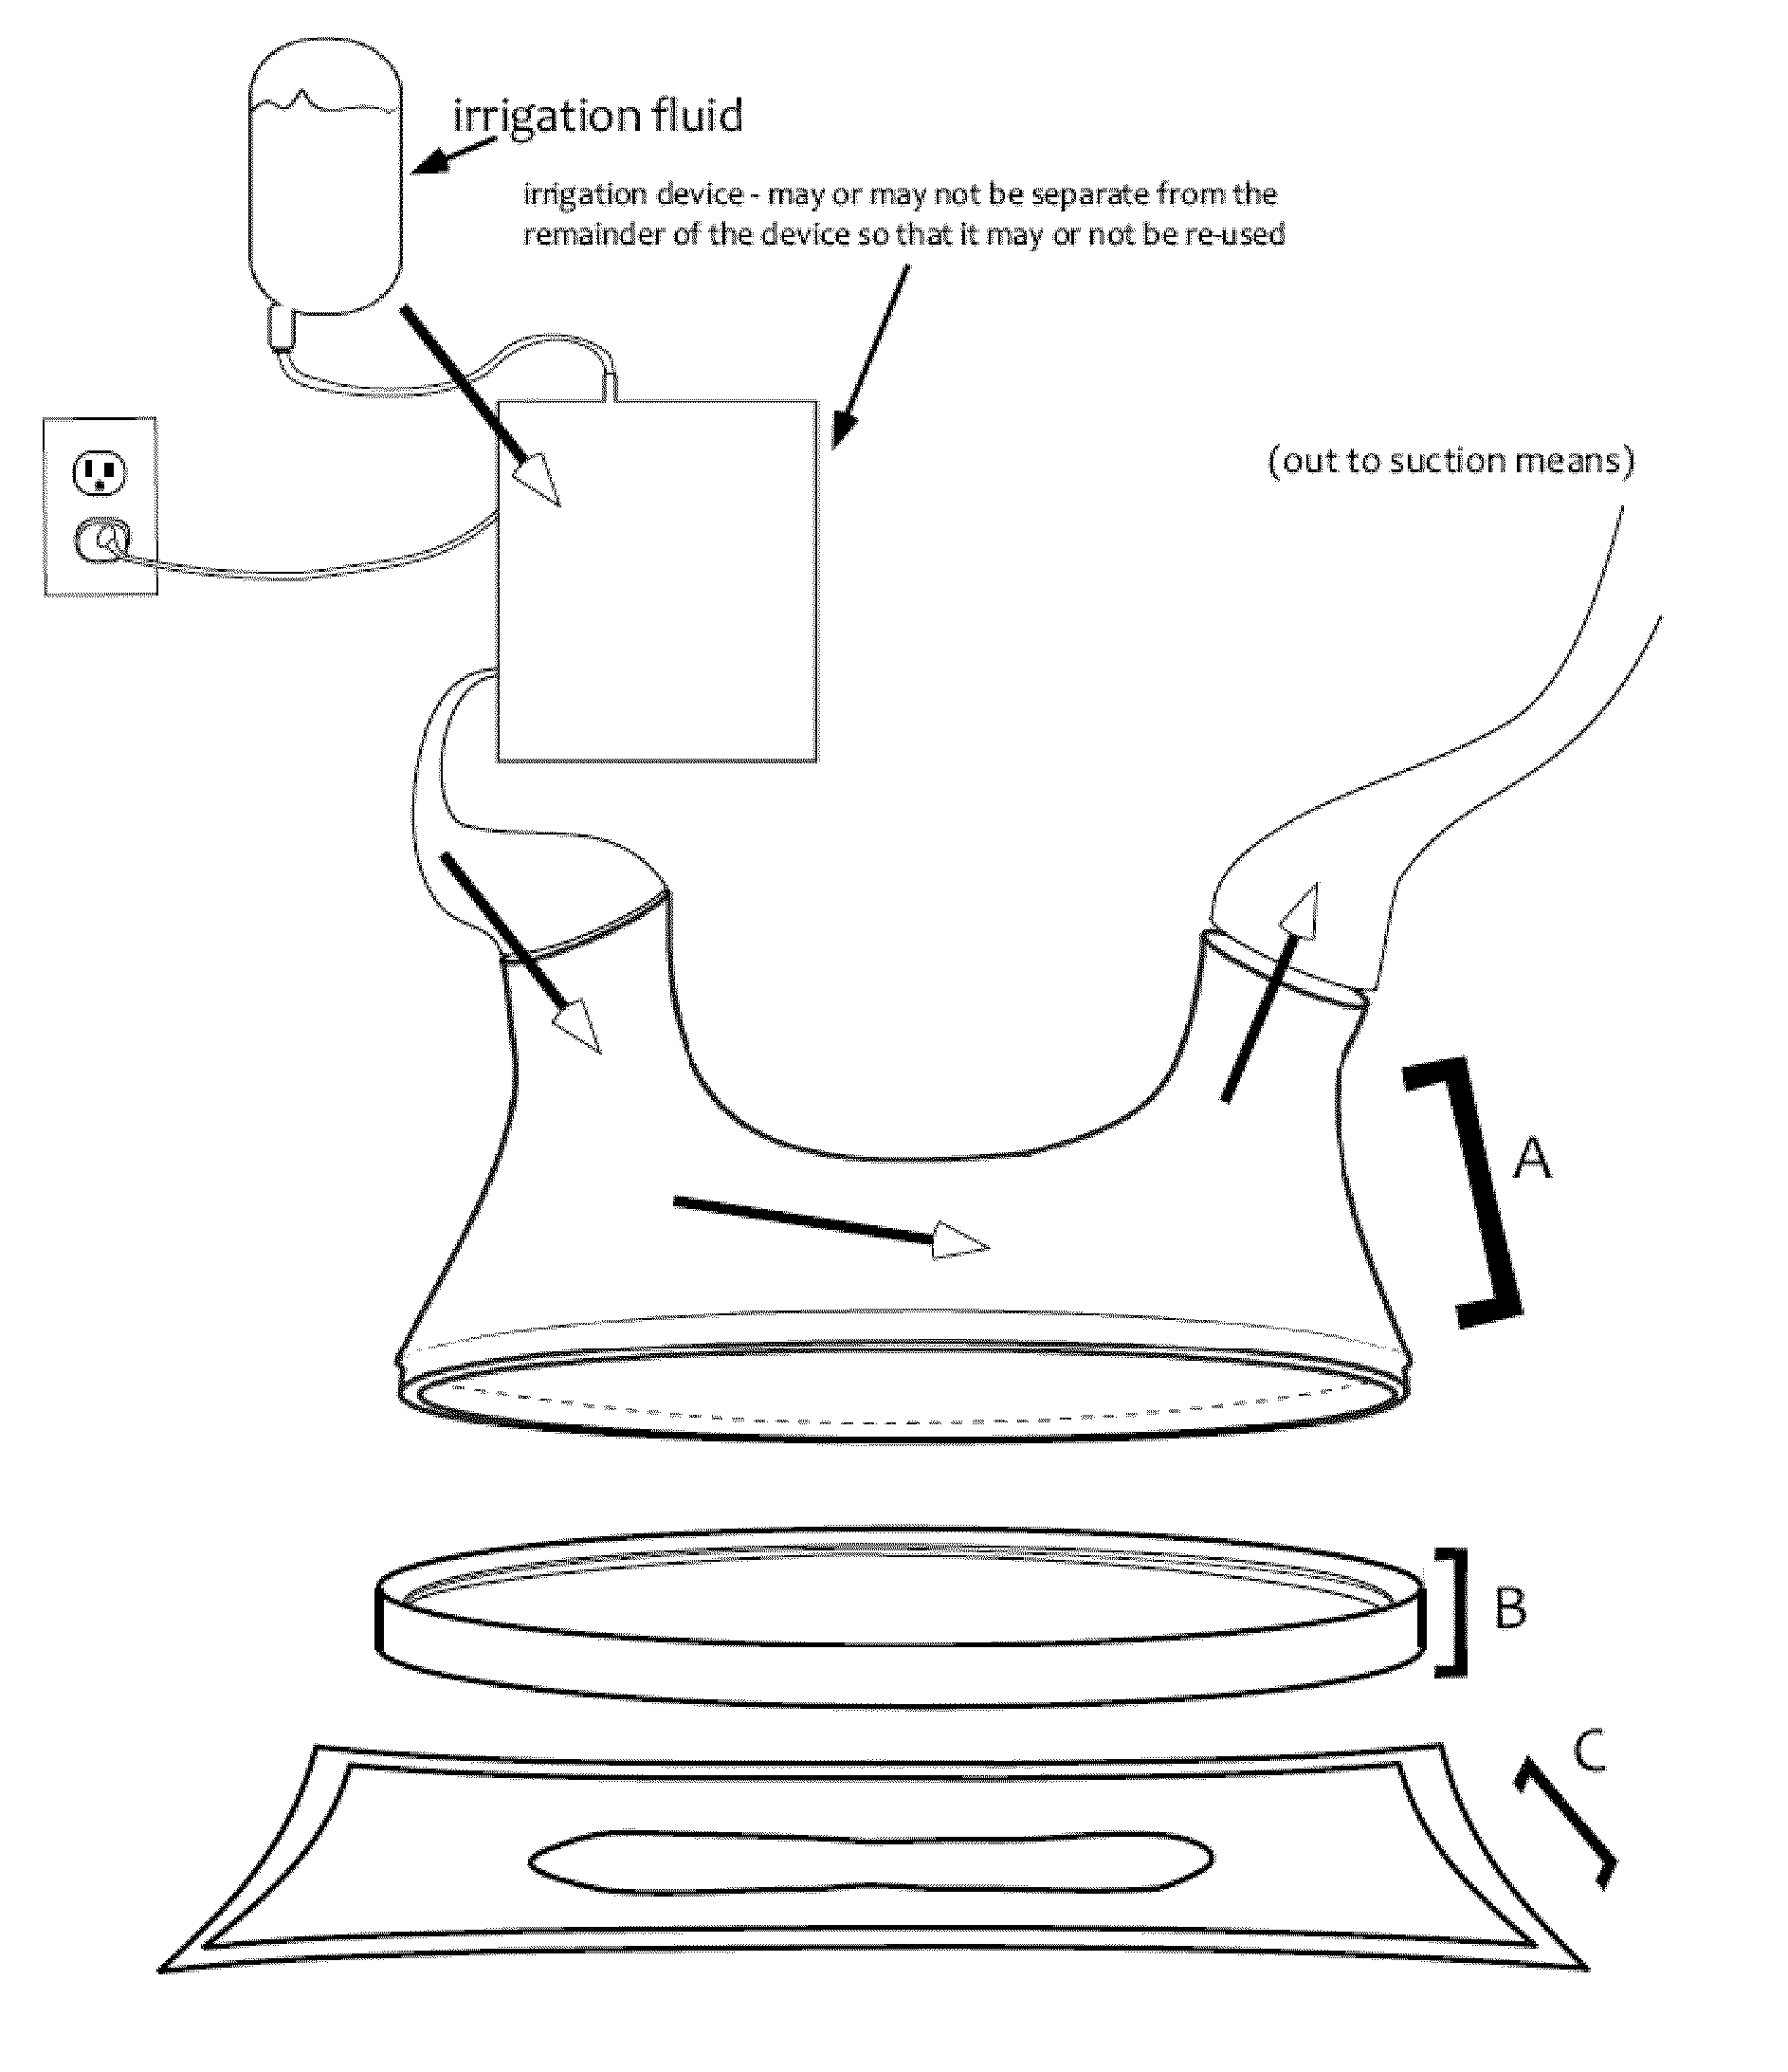 Wound treatment containment apparatus